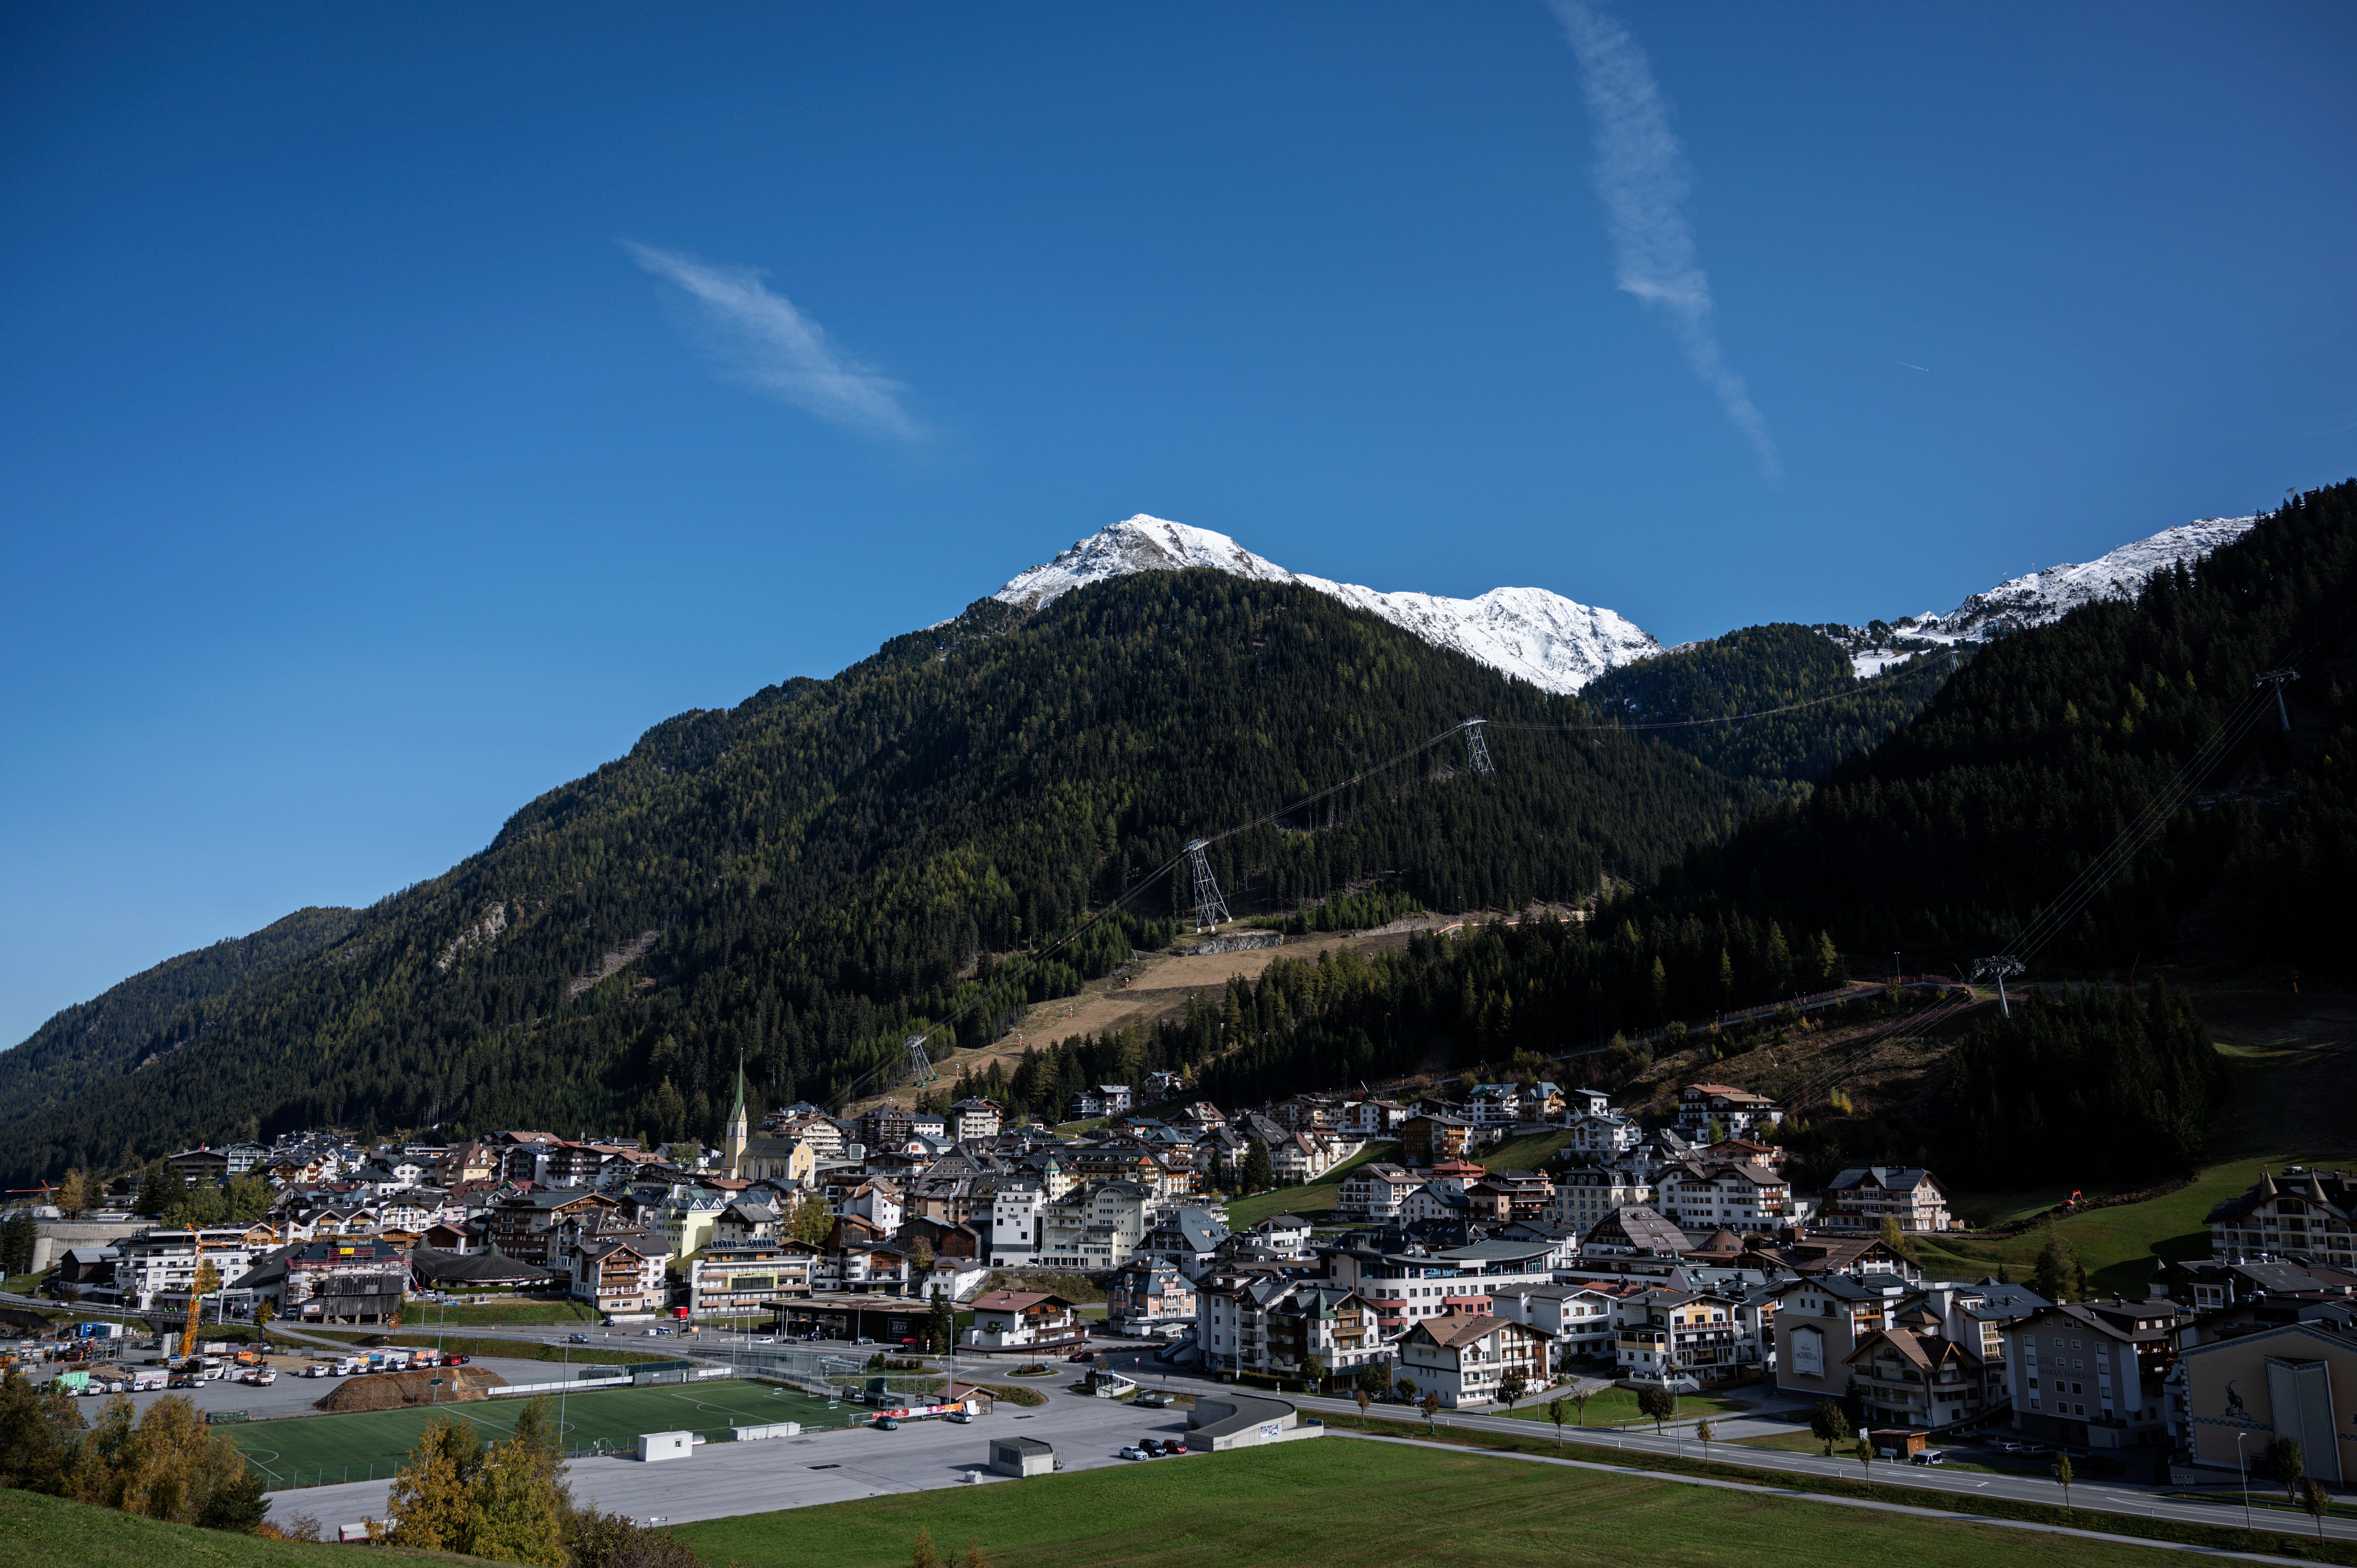 File photo: A view of the Tyrolean winter sports town Ischgl in Austria, 19 October 2020